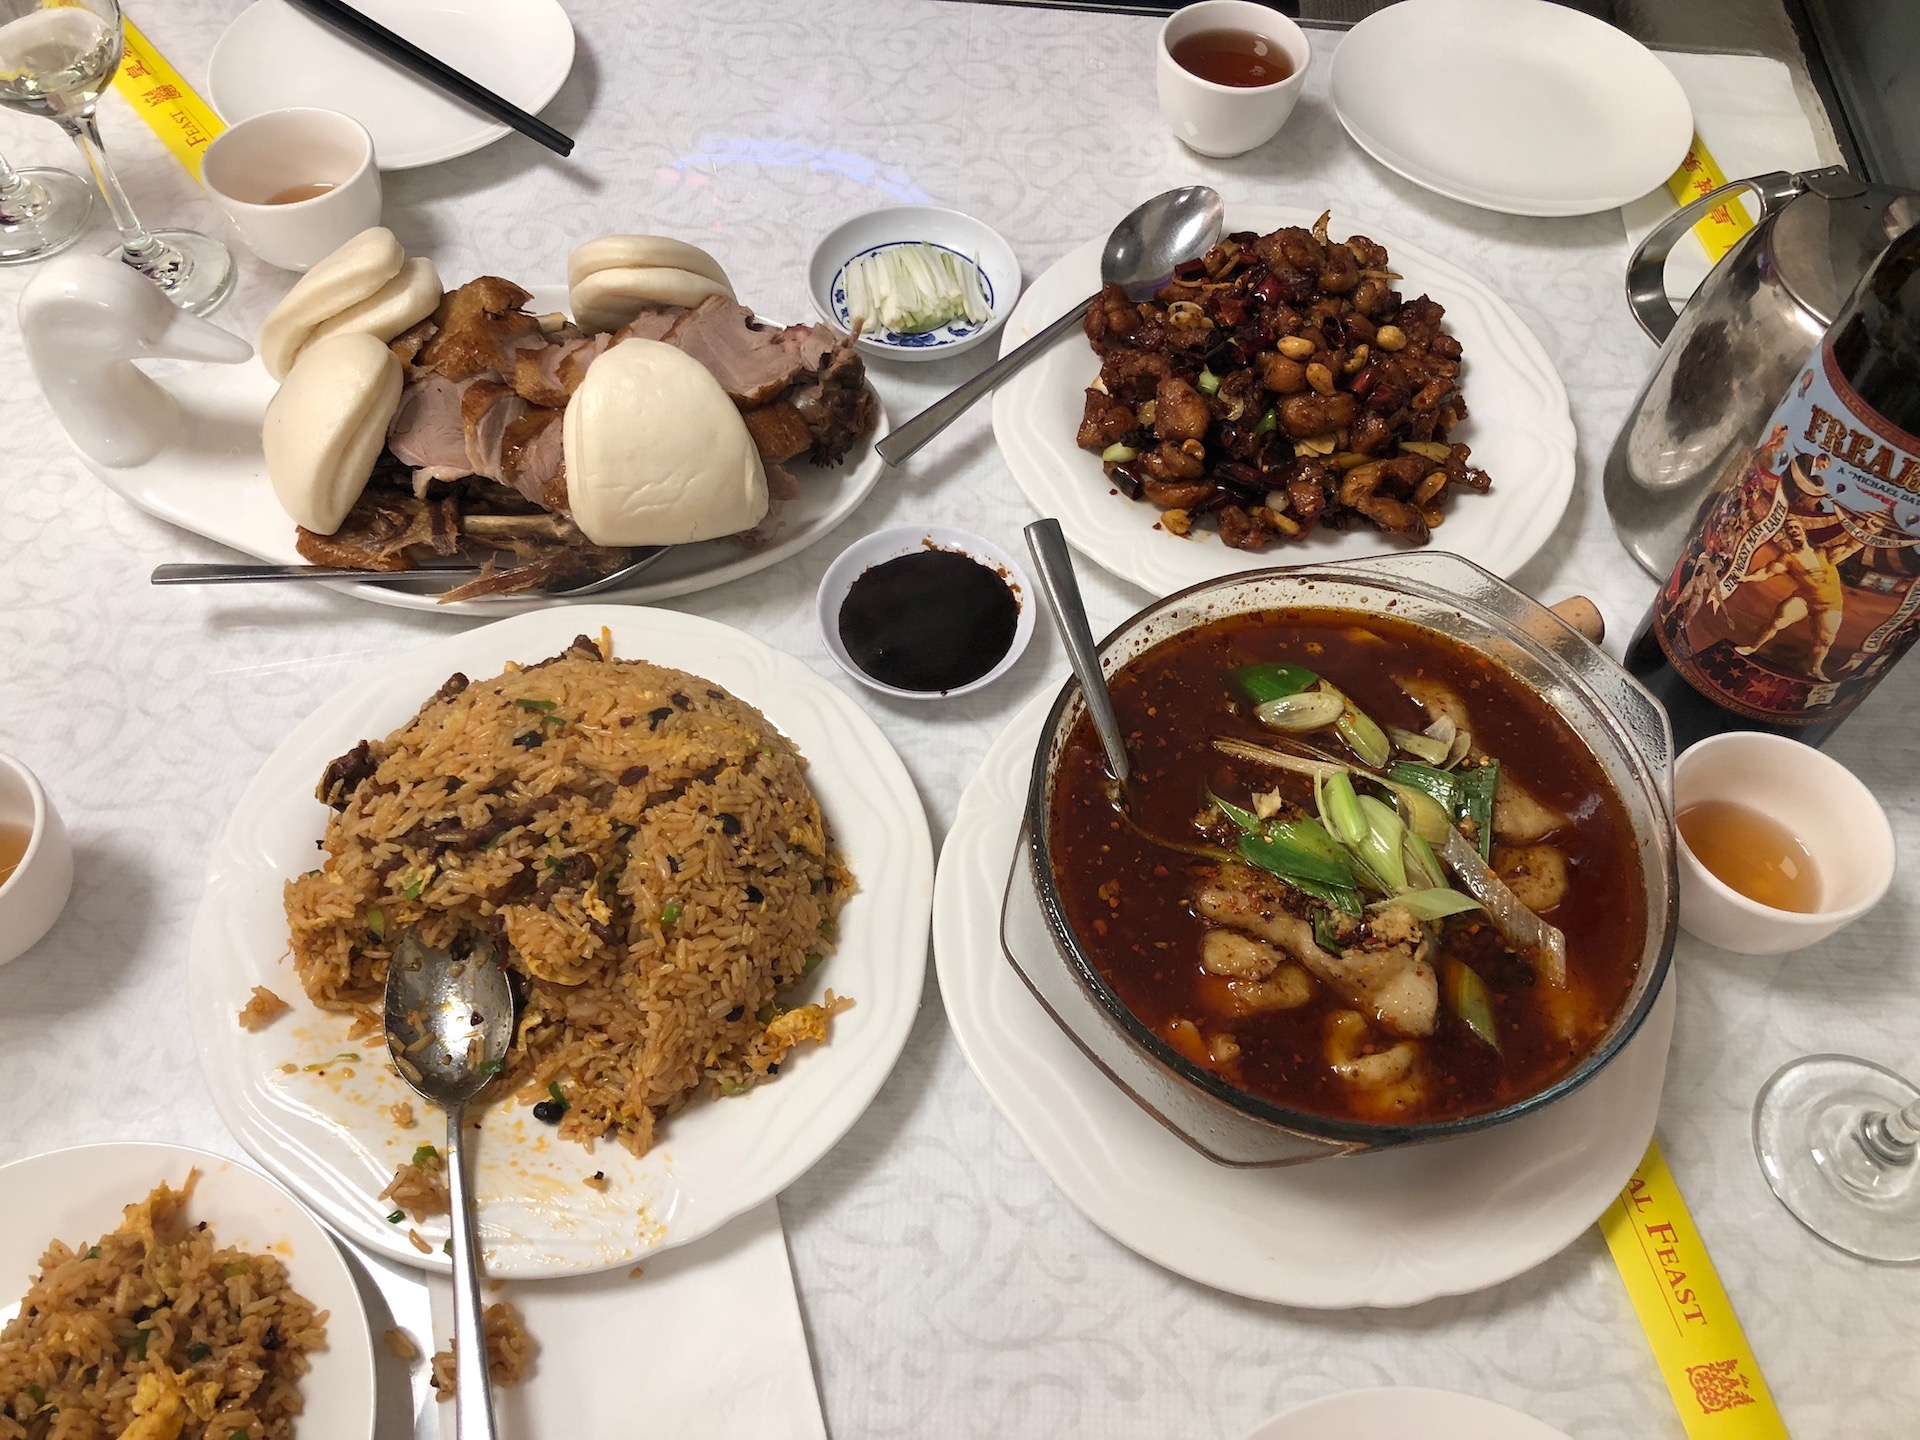 The feast is under way with a table of smoked duck, fried rice, kung pao chicken and more at Millbrae’s Royal Feast.